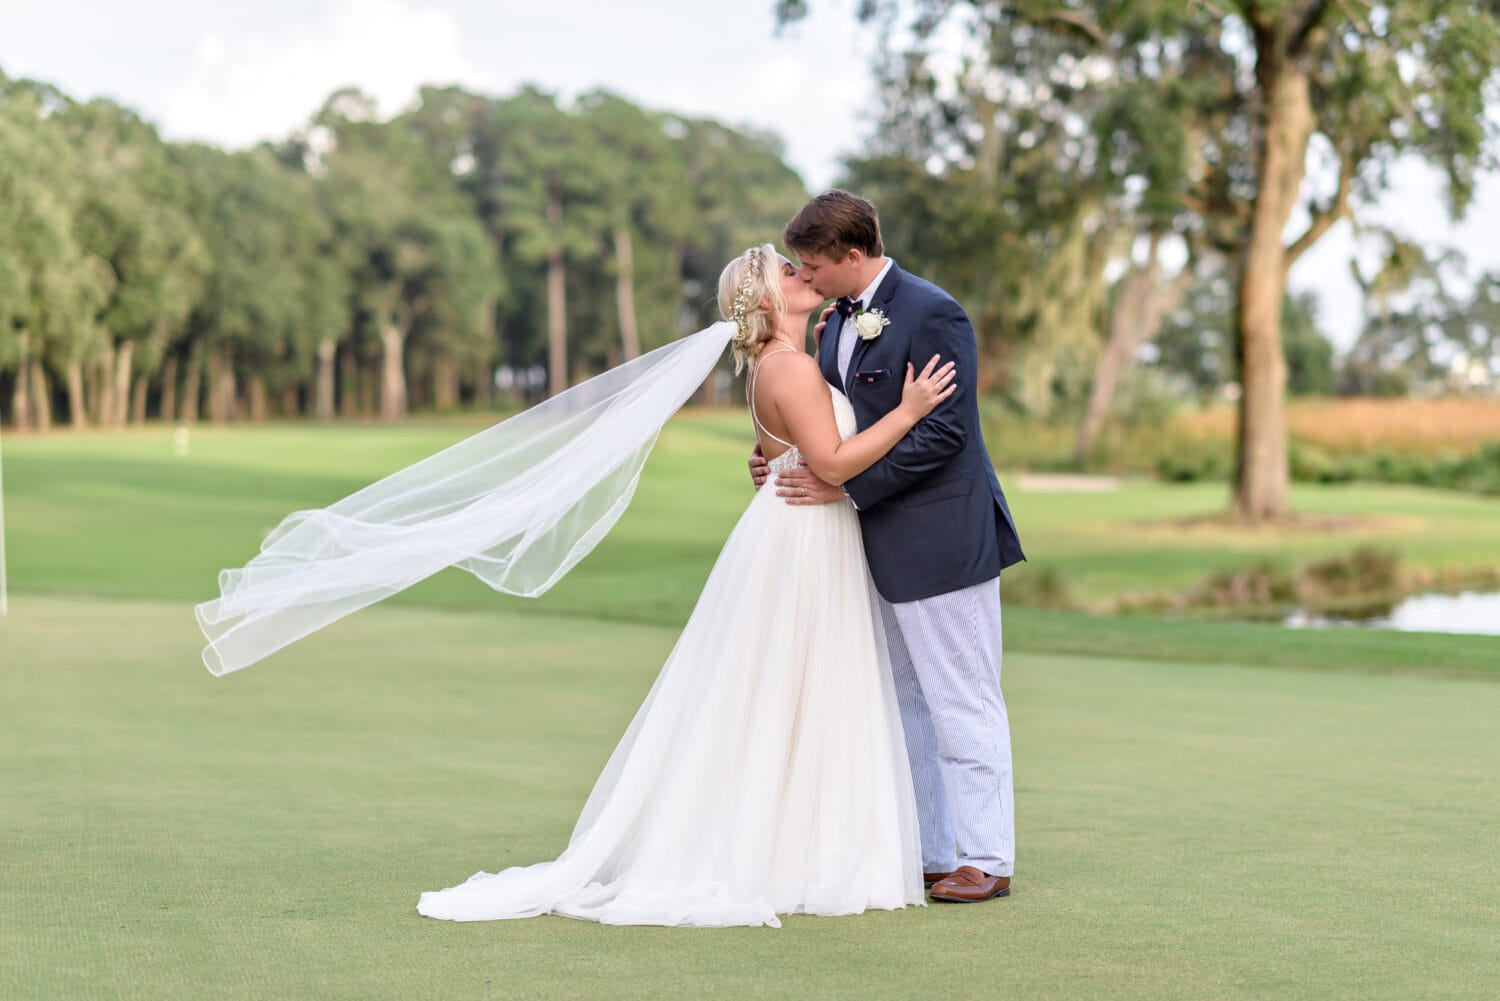 Brides veil blowing in the wind - Pawleys Plantation Golf & Country Club